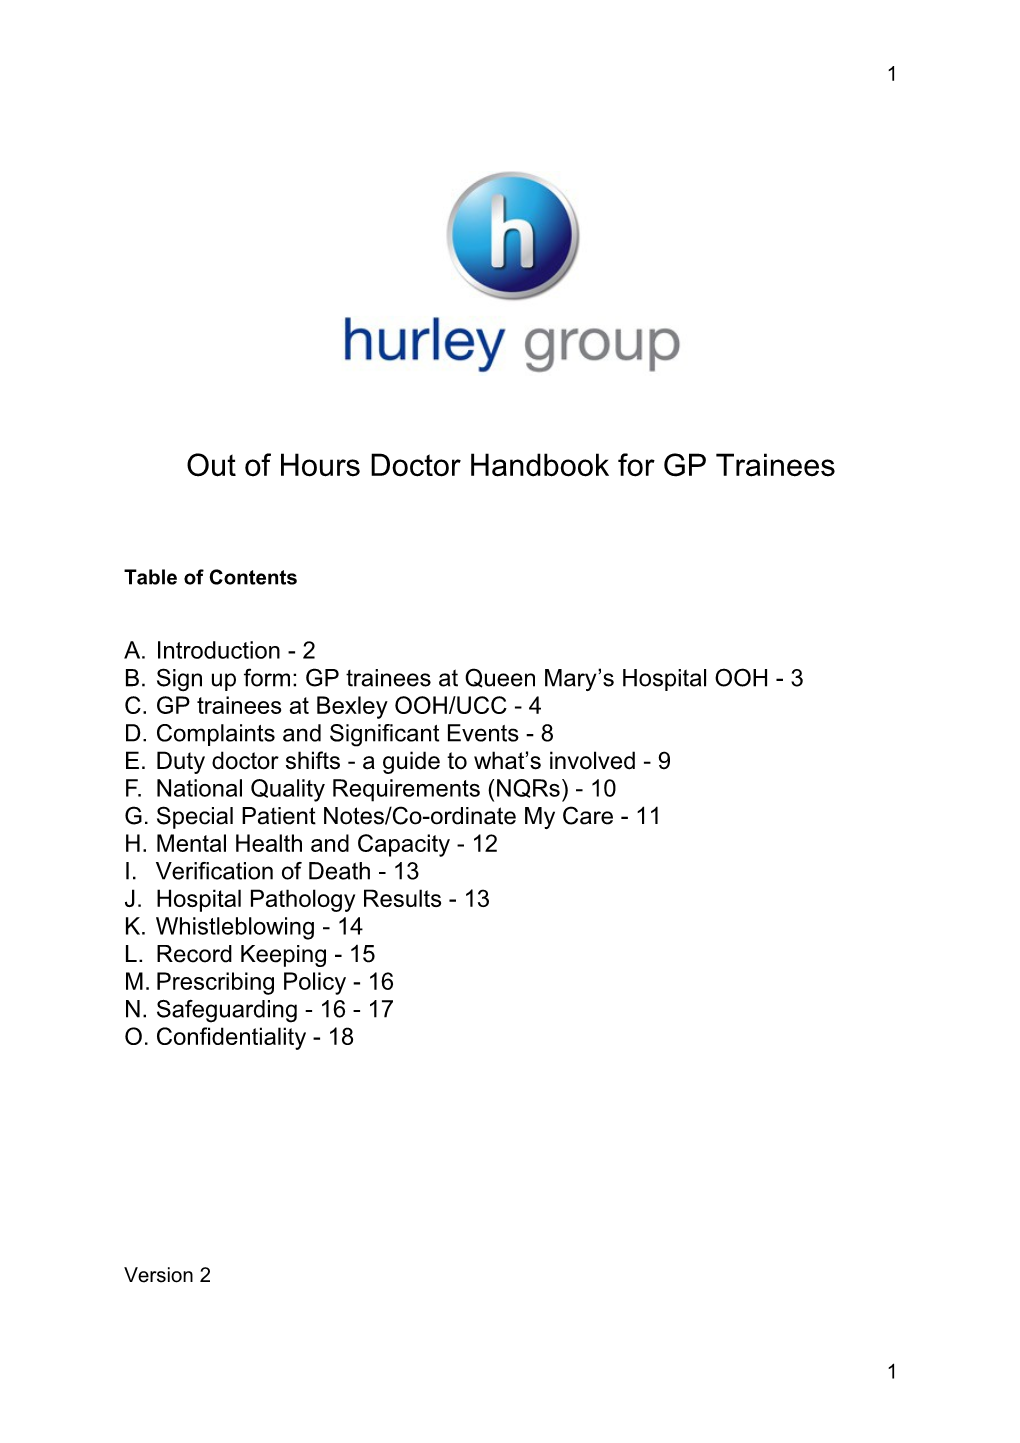 Out of Hours Doctor Handbook for GP Trainees